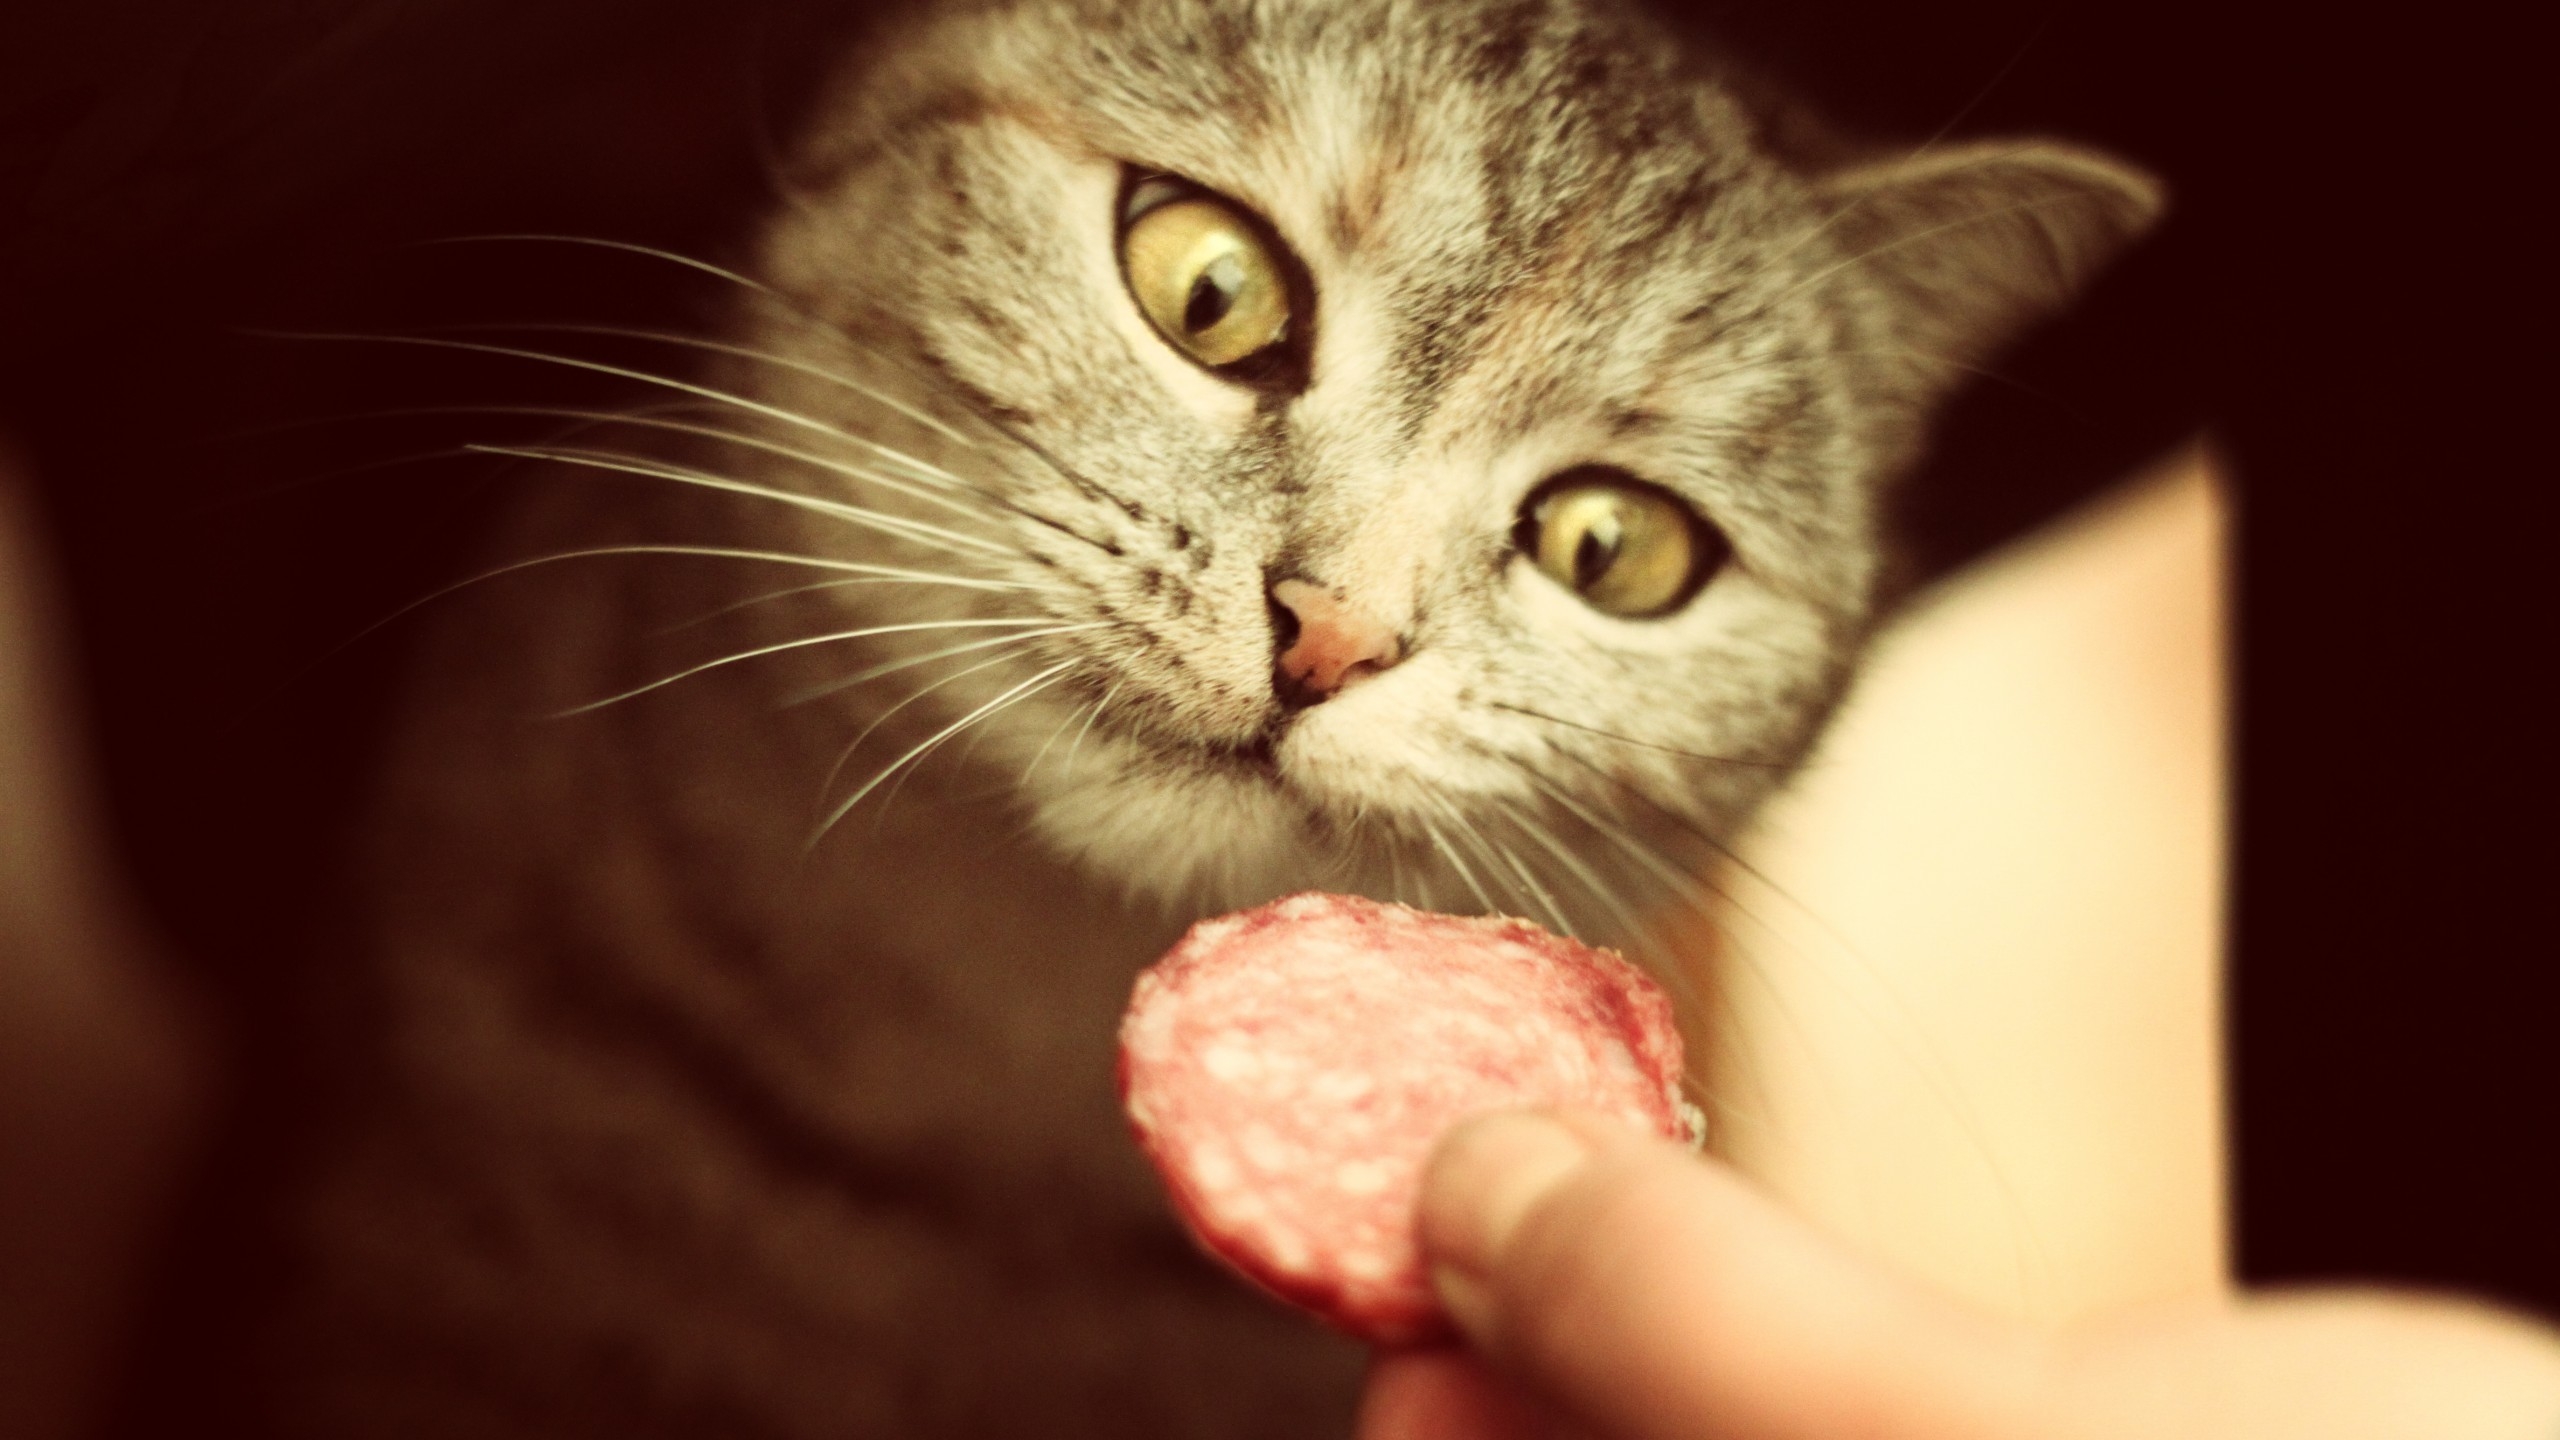 Salami for Cat for 2560x1440 HDTV resolution